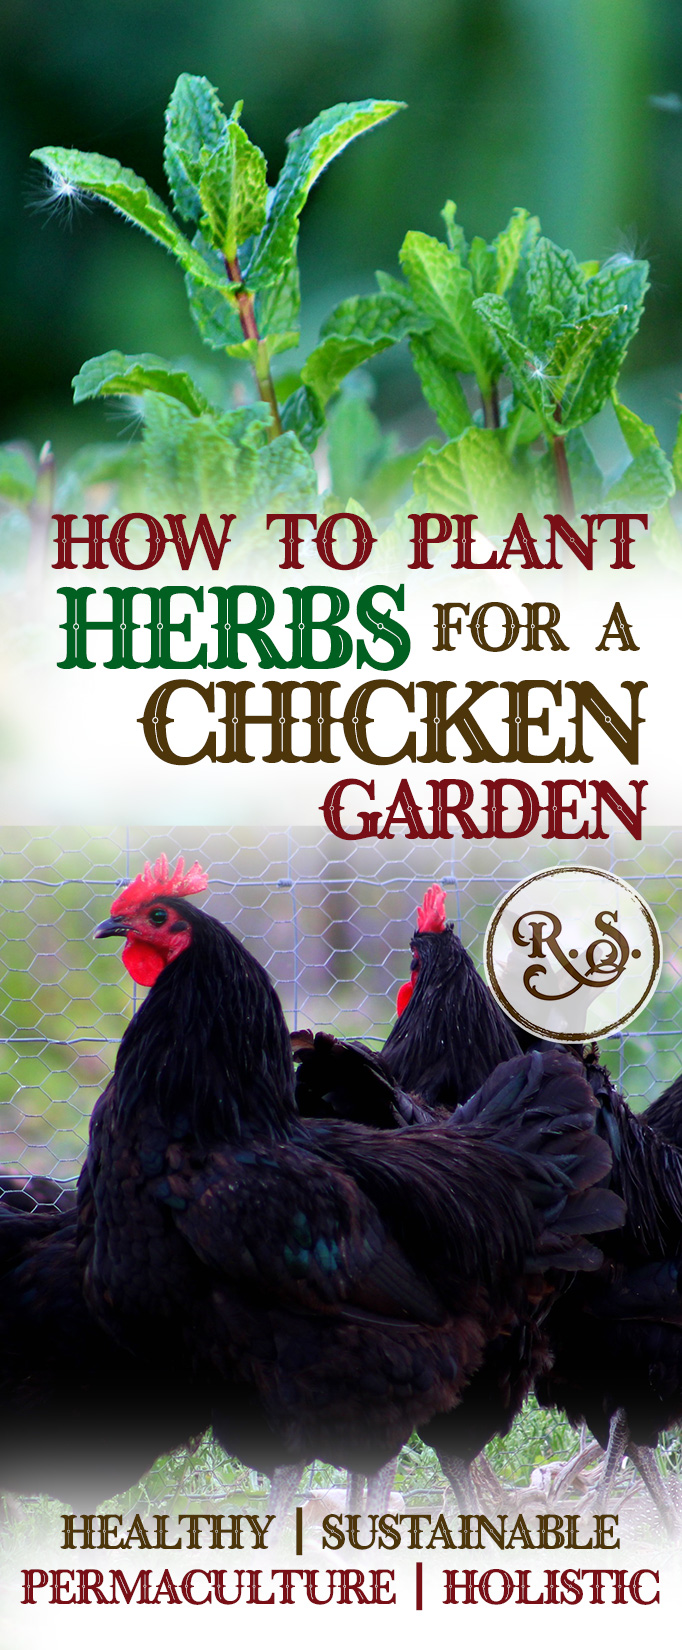 Grow herbs in your sustainable garden for your backyard chickens to save money. Natural health for your chickens—permaculture style. Great DIY herbal health ideas for your hens.